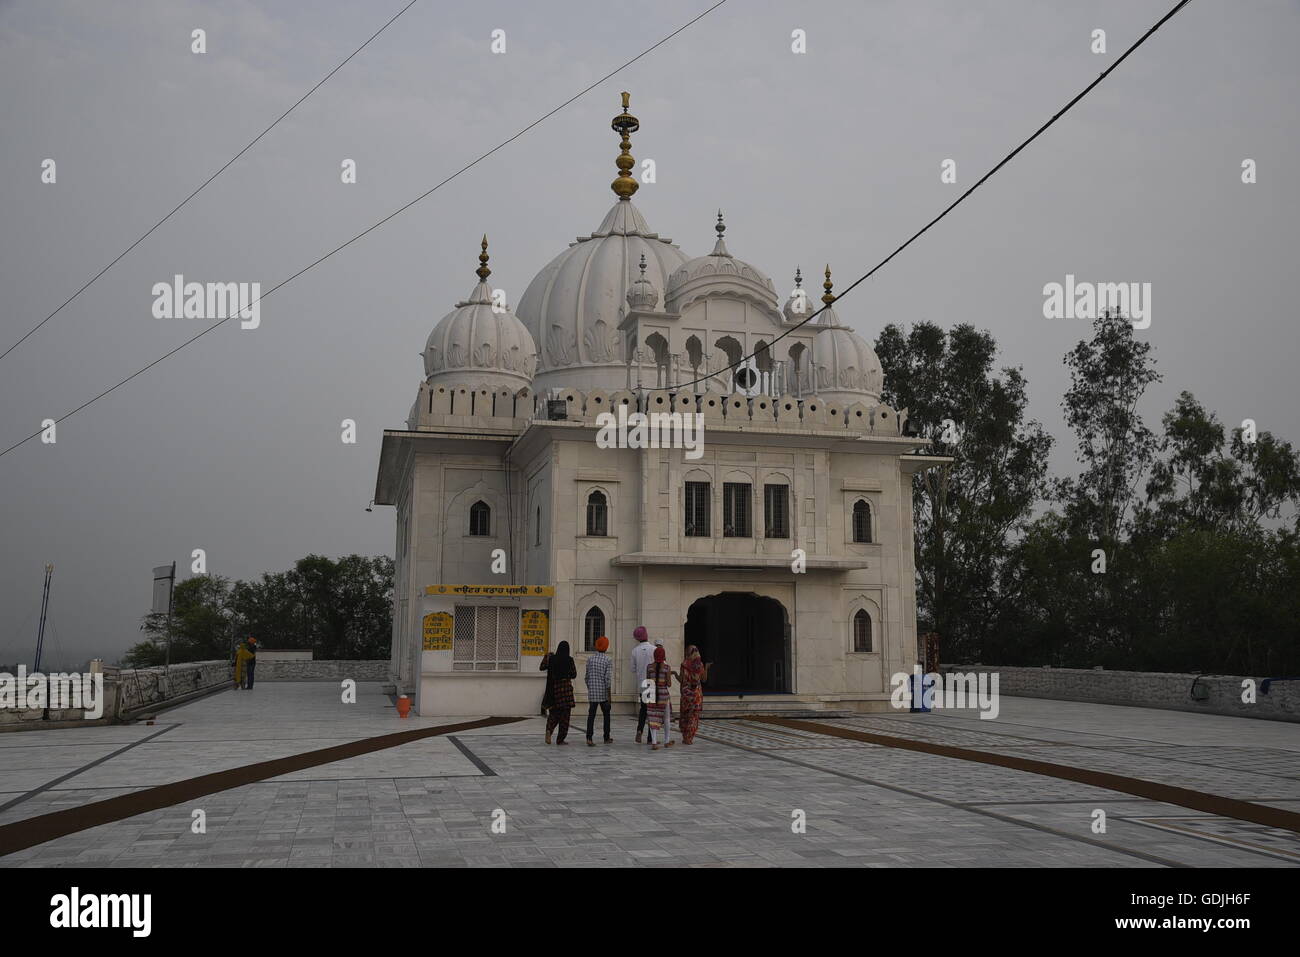 This gurdwara faces Anadghar fortess in Anandpur Sahib. Situated on a hill it overlooks Anadpur Sahib. Stock Photo